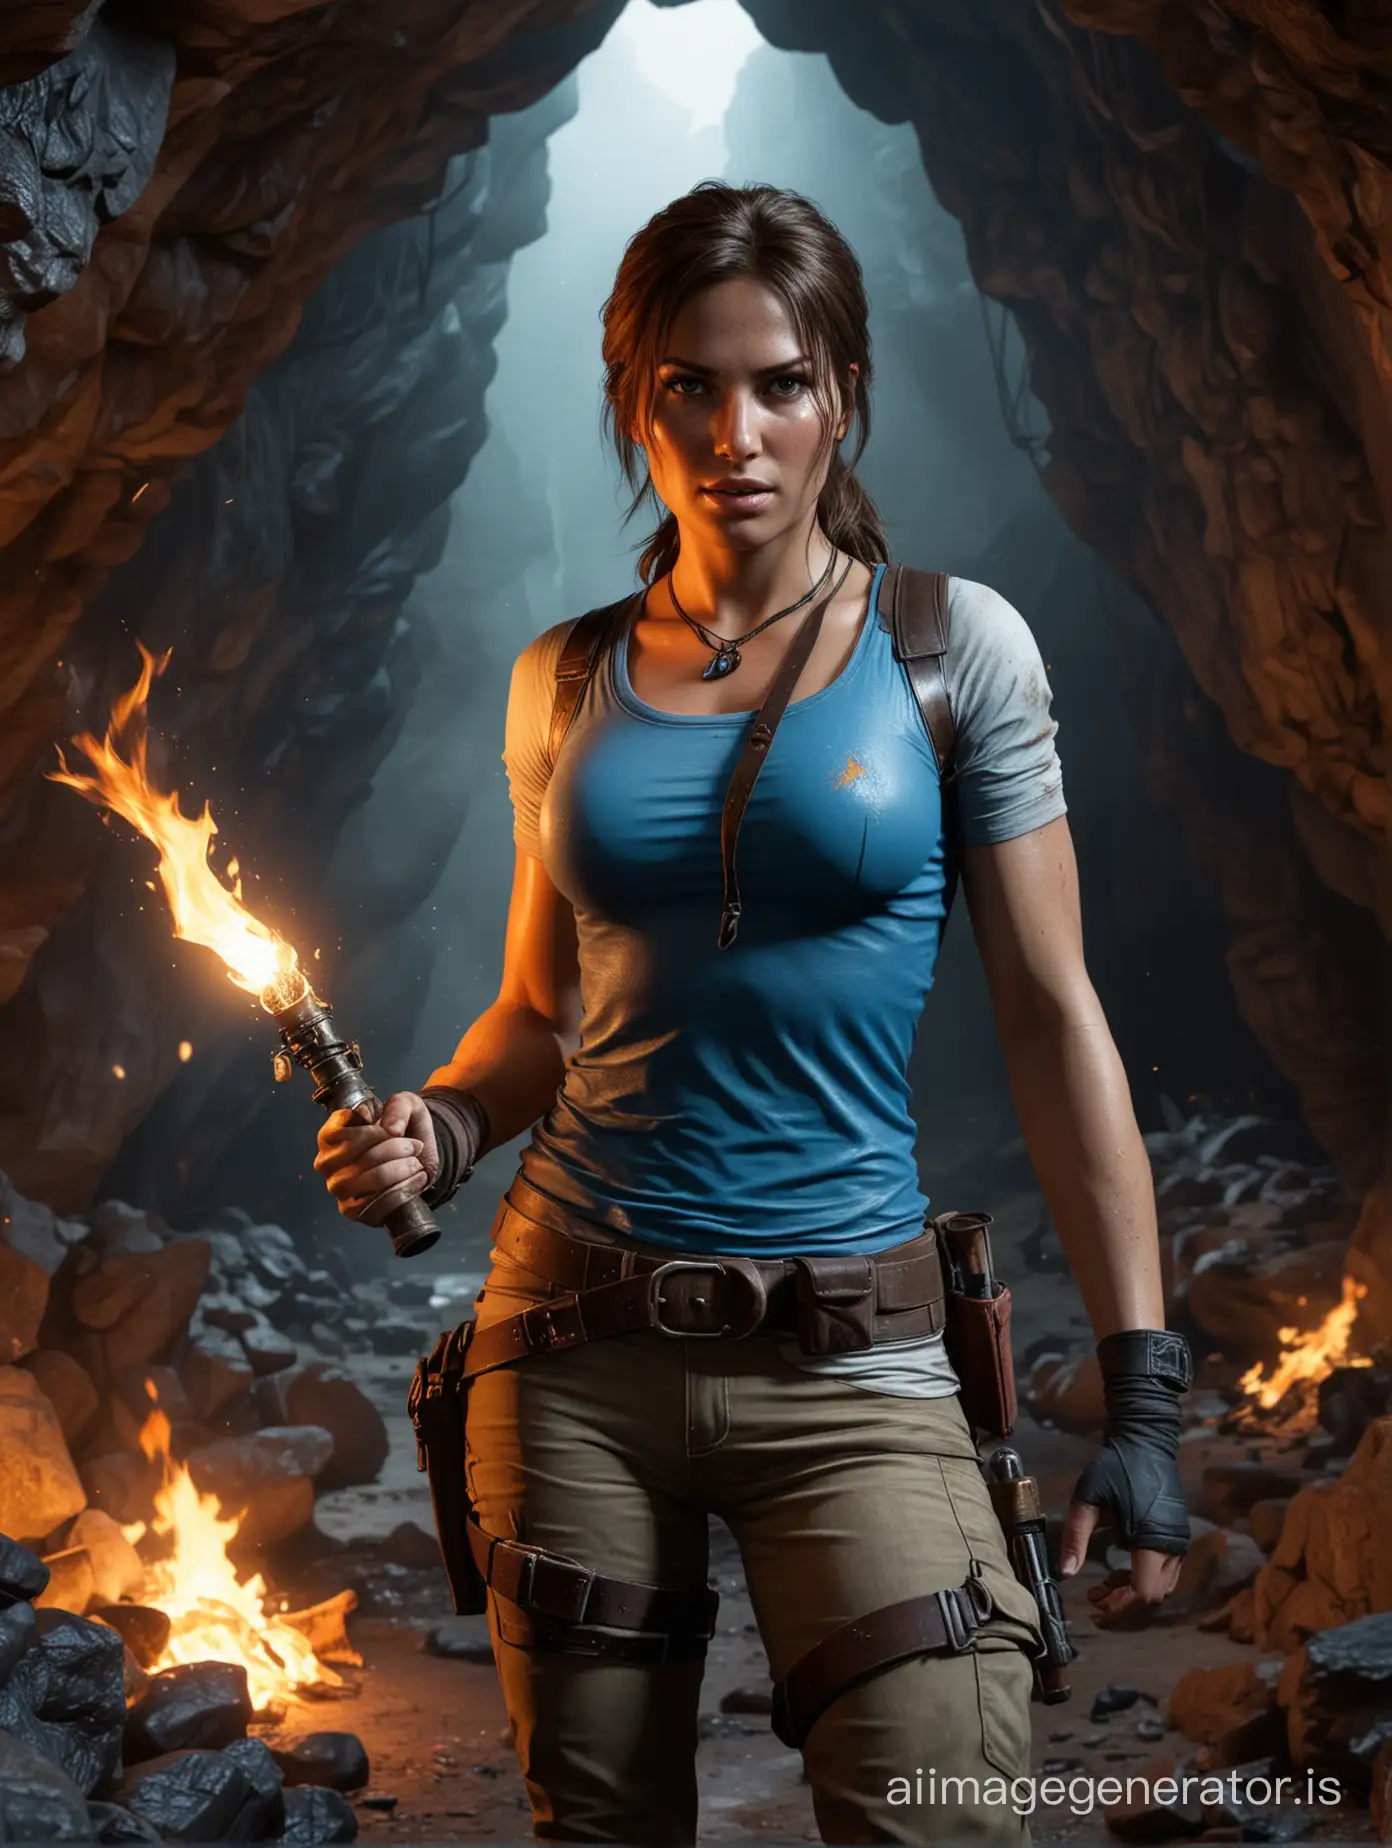 Lara Croft in a cave with fire, holding a flaming torch. Blue top lara croft classic outfit